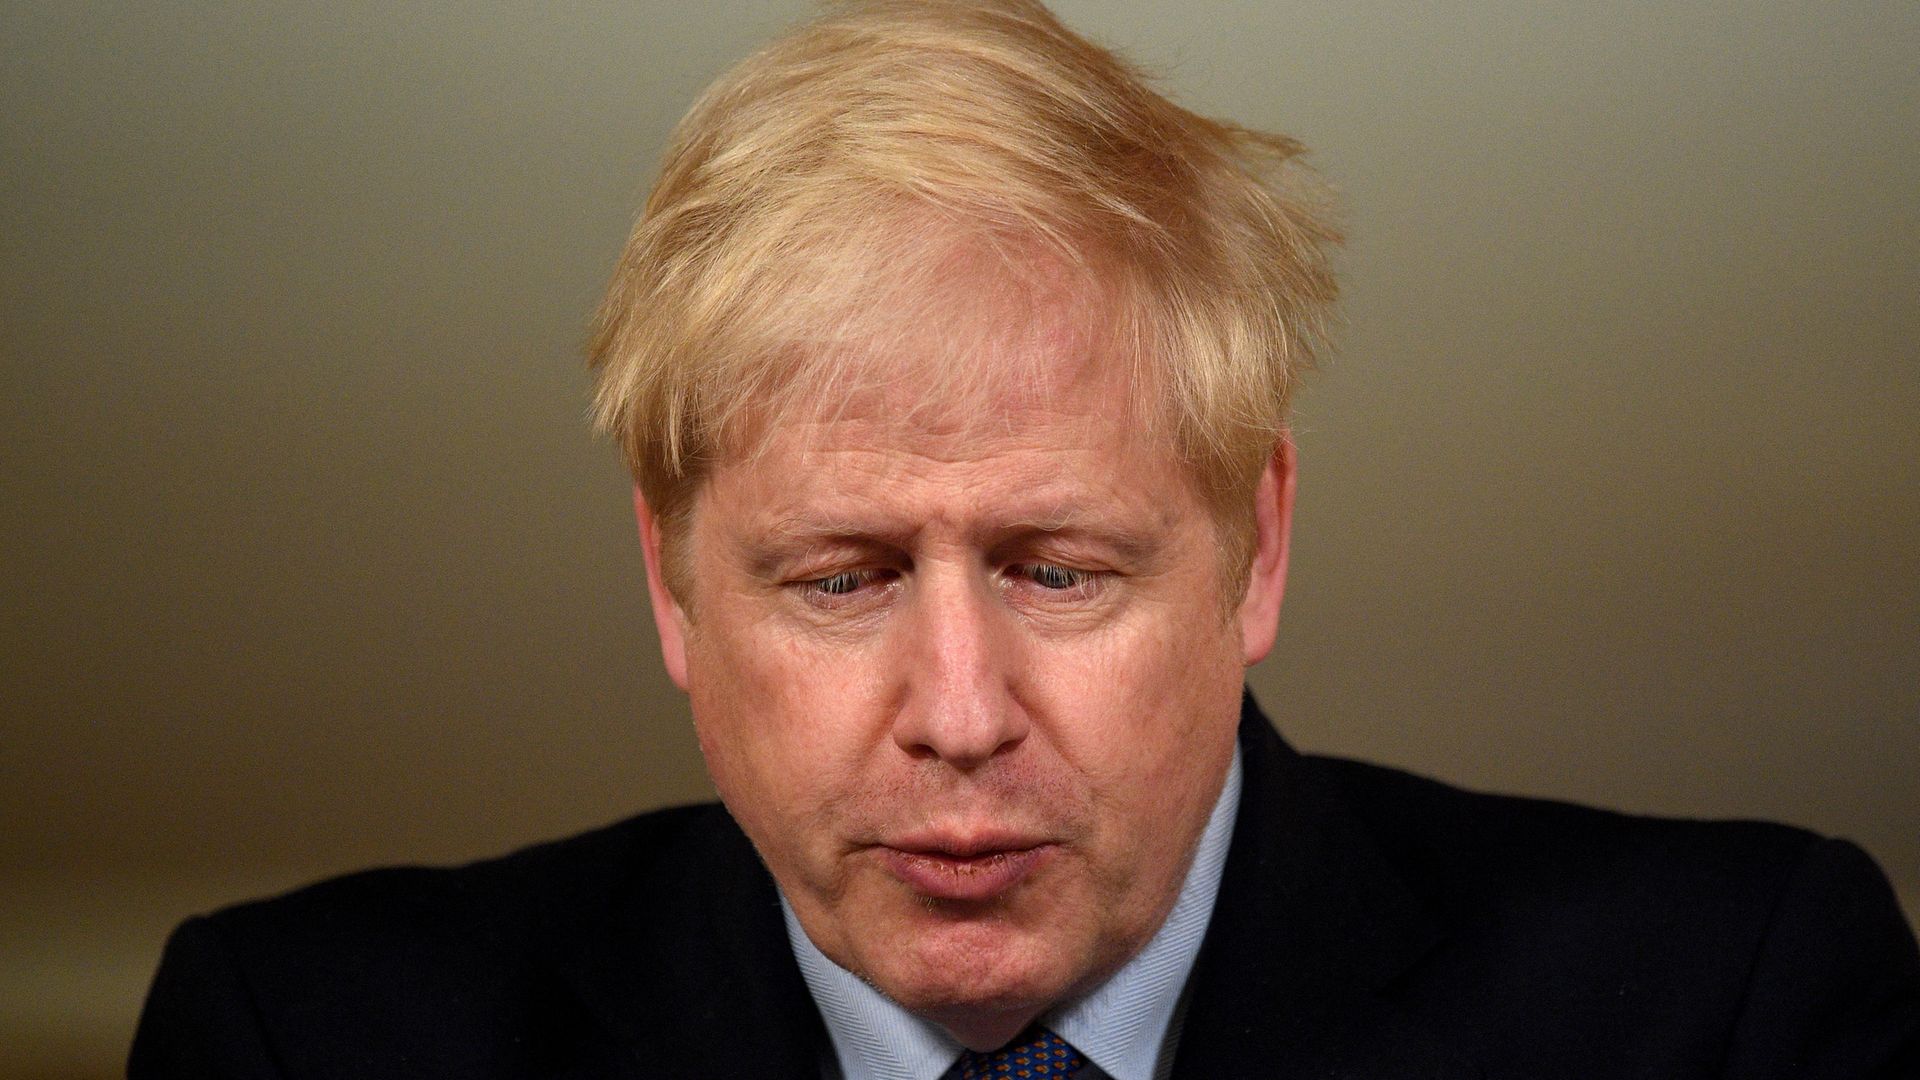 Prime minister Boris Johnson during a media briefing in Downing Street, London, on coronavirus (COVID-19). - Credit: PA